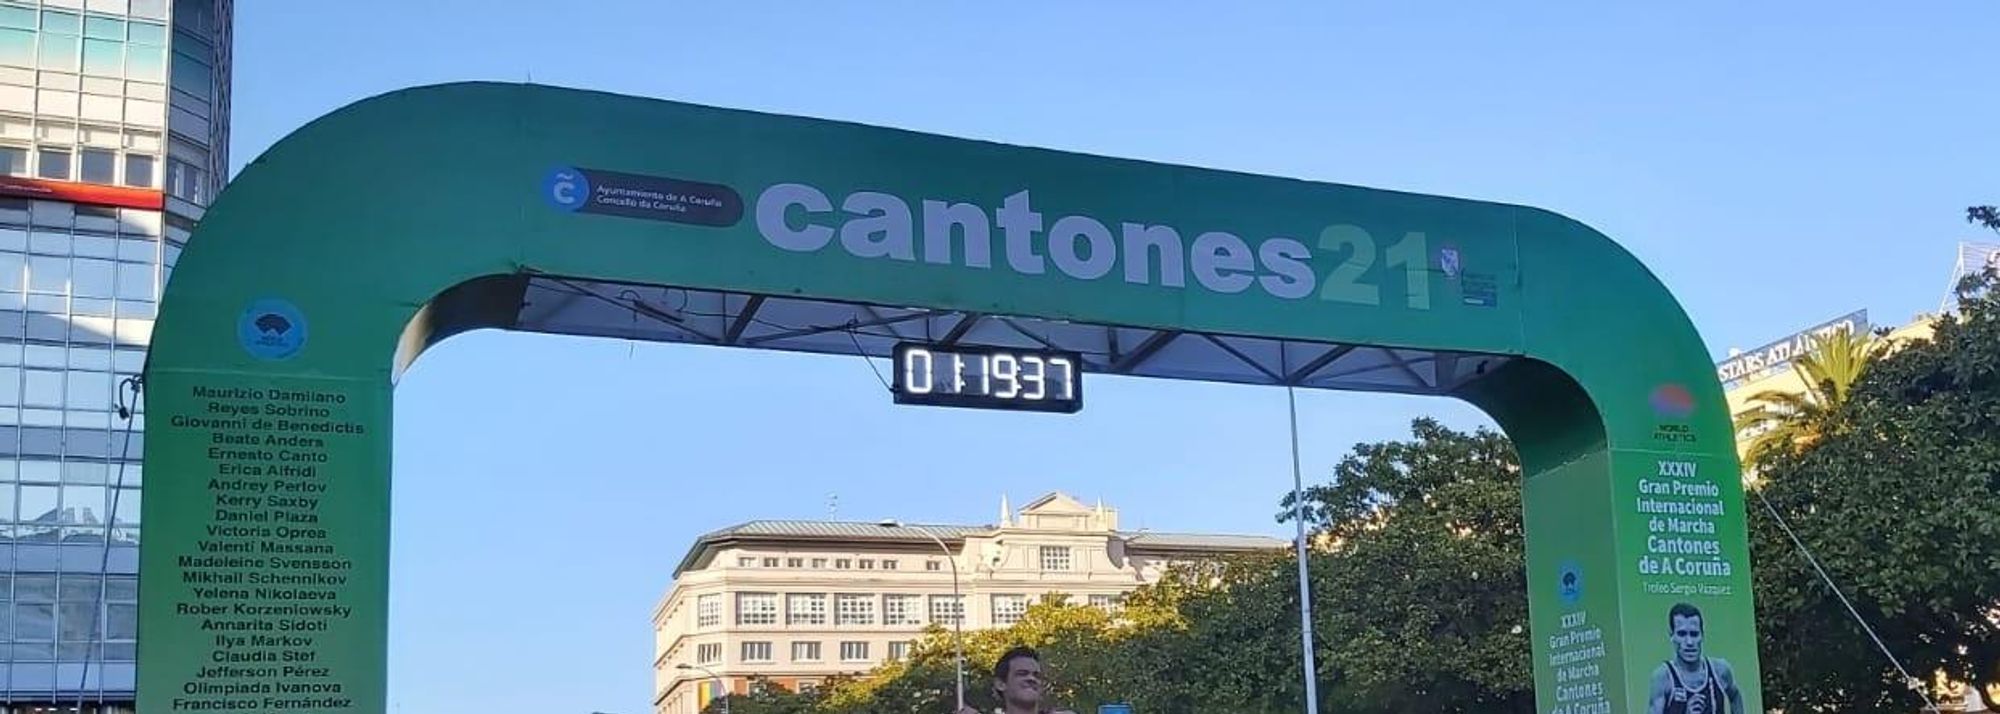 Spain's European bronze medallist Diego Garcia and Colombia's world fifth-placer Sandra Lorena Arenas were successful at the Gran Premio Cantones de La Coruna ­– the Spanish leg of this year’s World Athletics Challenge - Race Walking – on Saturday (5) over a flat and fast 1km circuit at sea level.